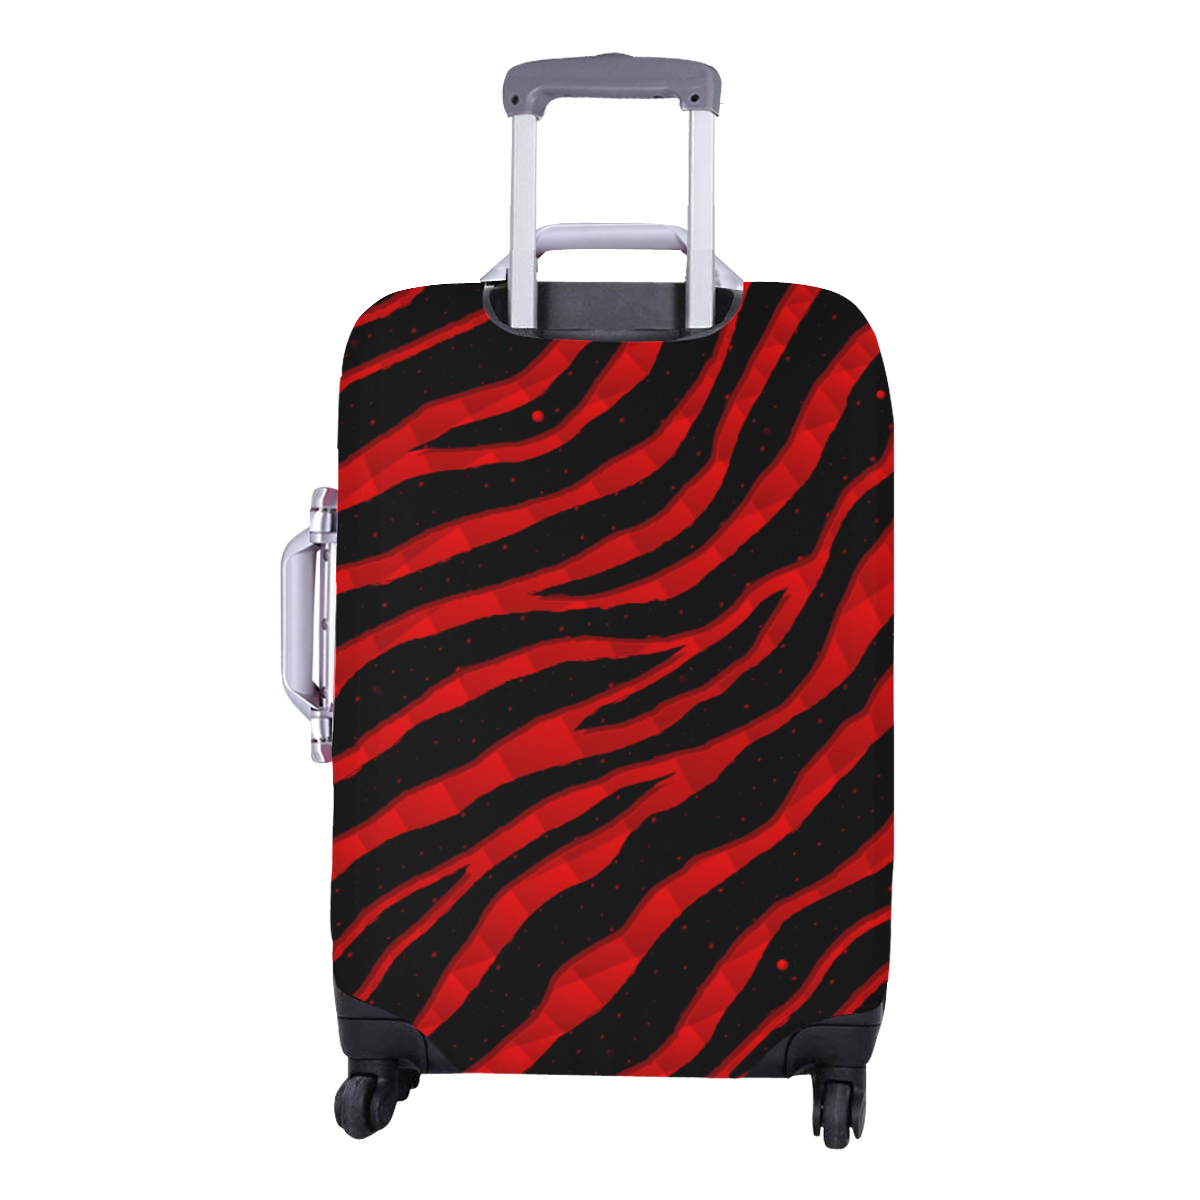 Ripped SpaceTime Stripes - Red Luggage Cover/Medium 22"-25"